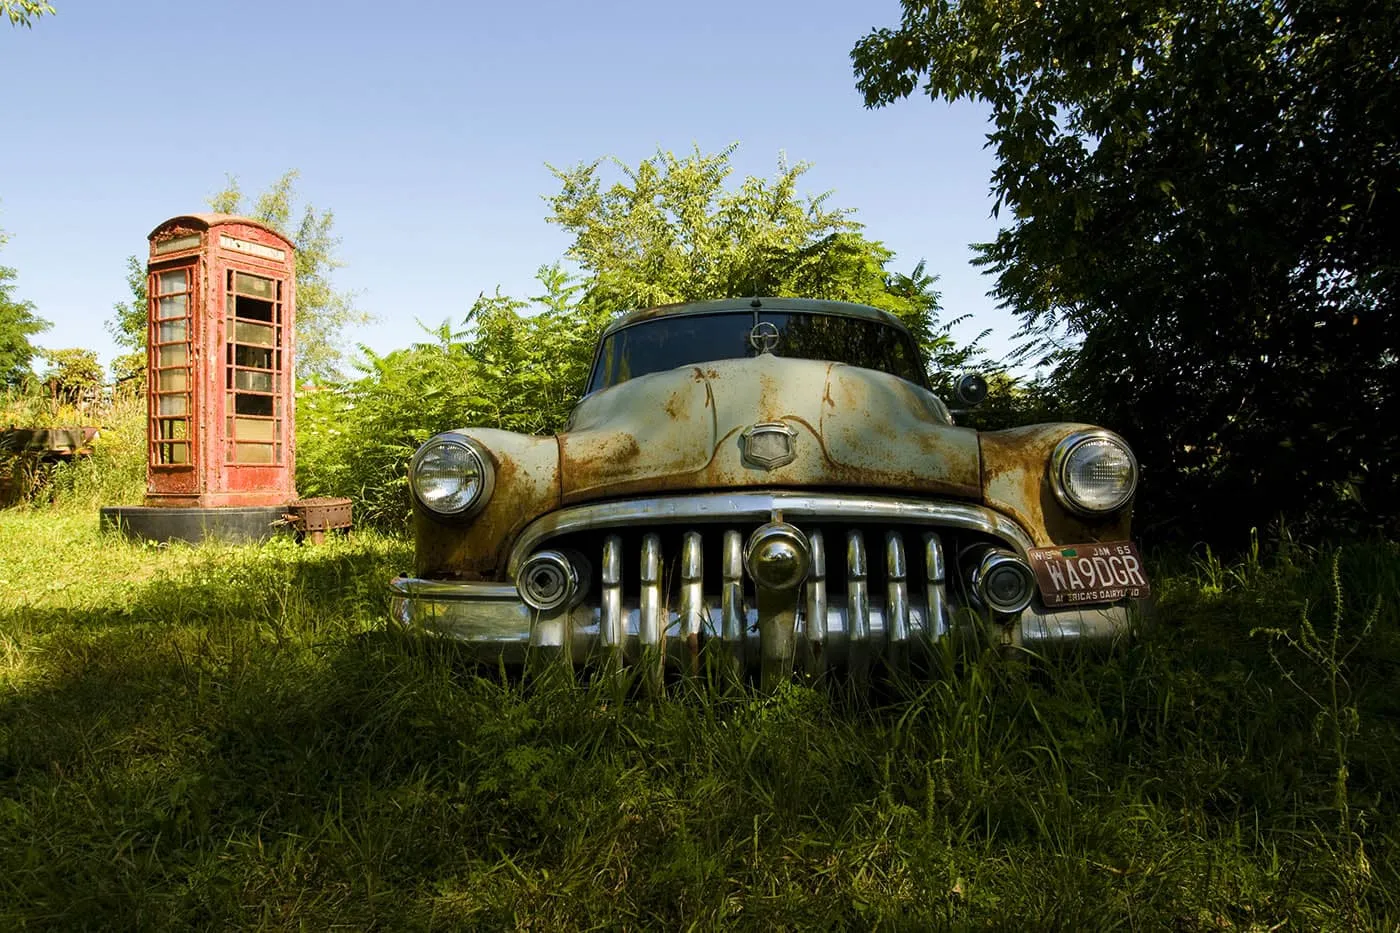 Old cars. The world's largest scrap metal sculpture, Dr. Evermor's Forevertron at Delaney's Surplus Sales in Sumpter, Wisconsin, is meant for intergalactic travel. Visit this weird roadside attraction on a Wisconsin road trip.